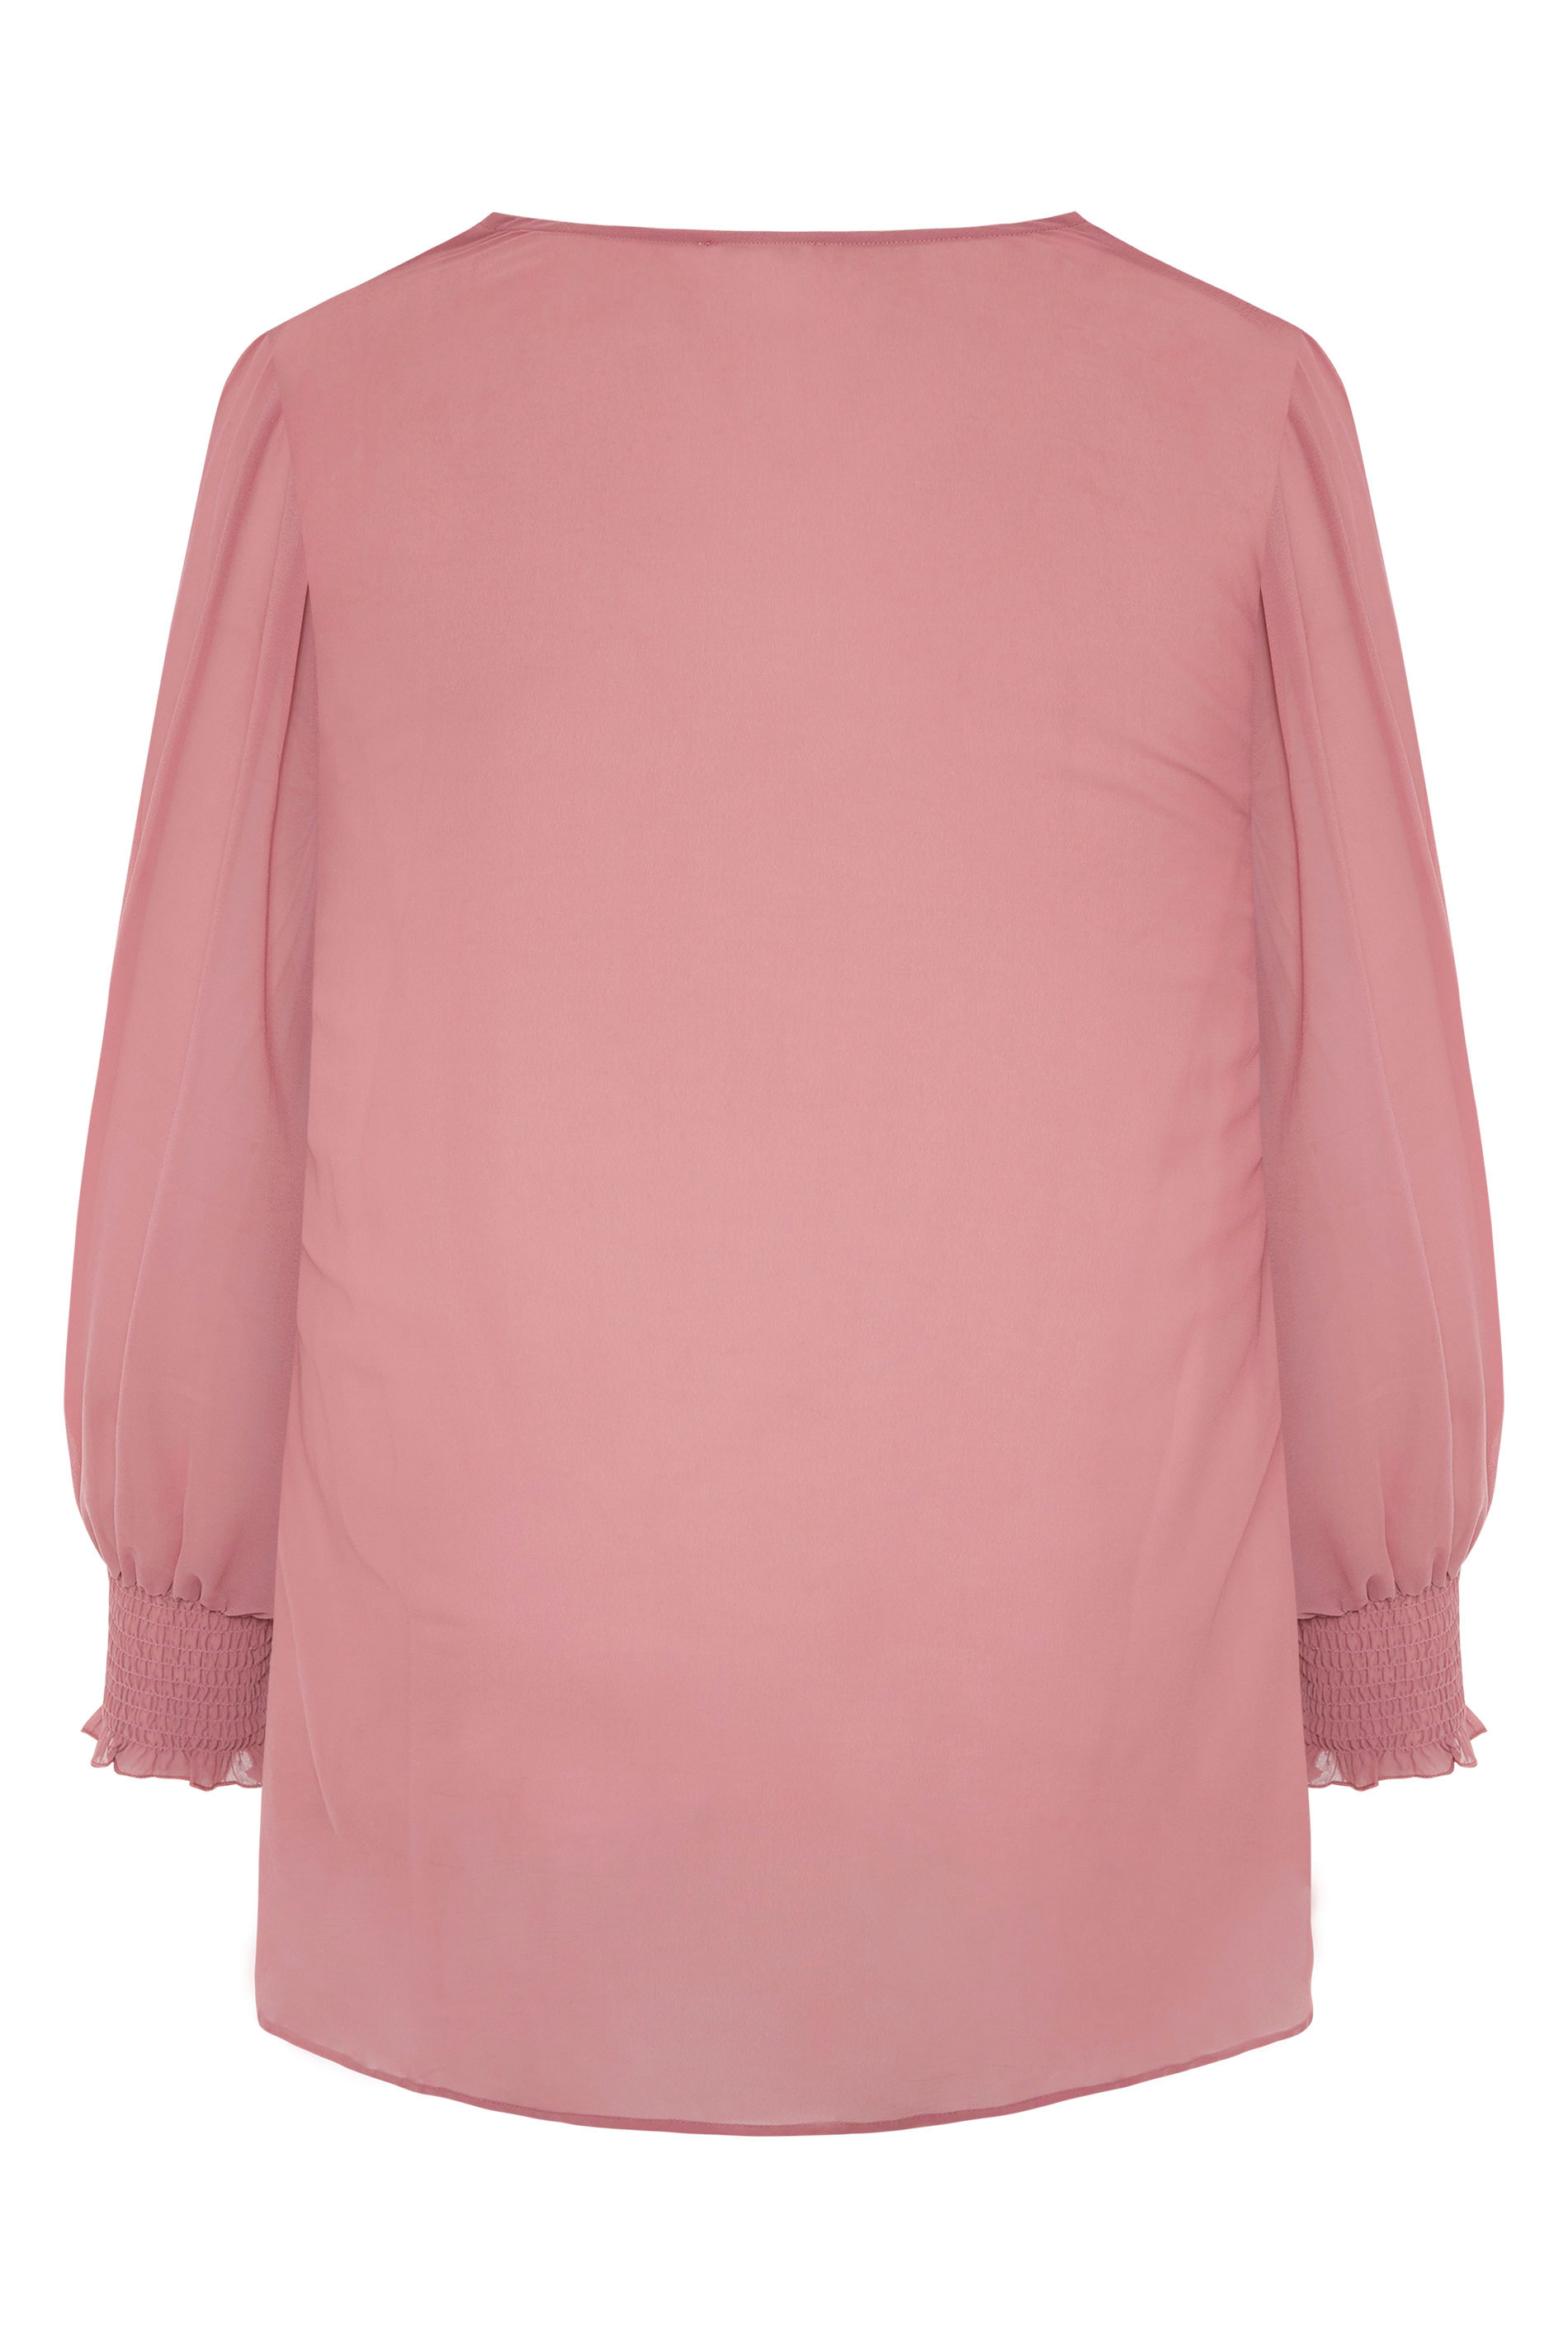 Plus Size YOURS LONDON Pink Balloon Sleeve Shirt | Yours Clothing